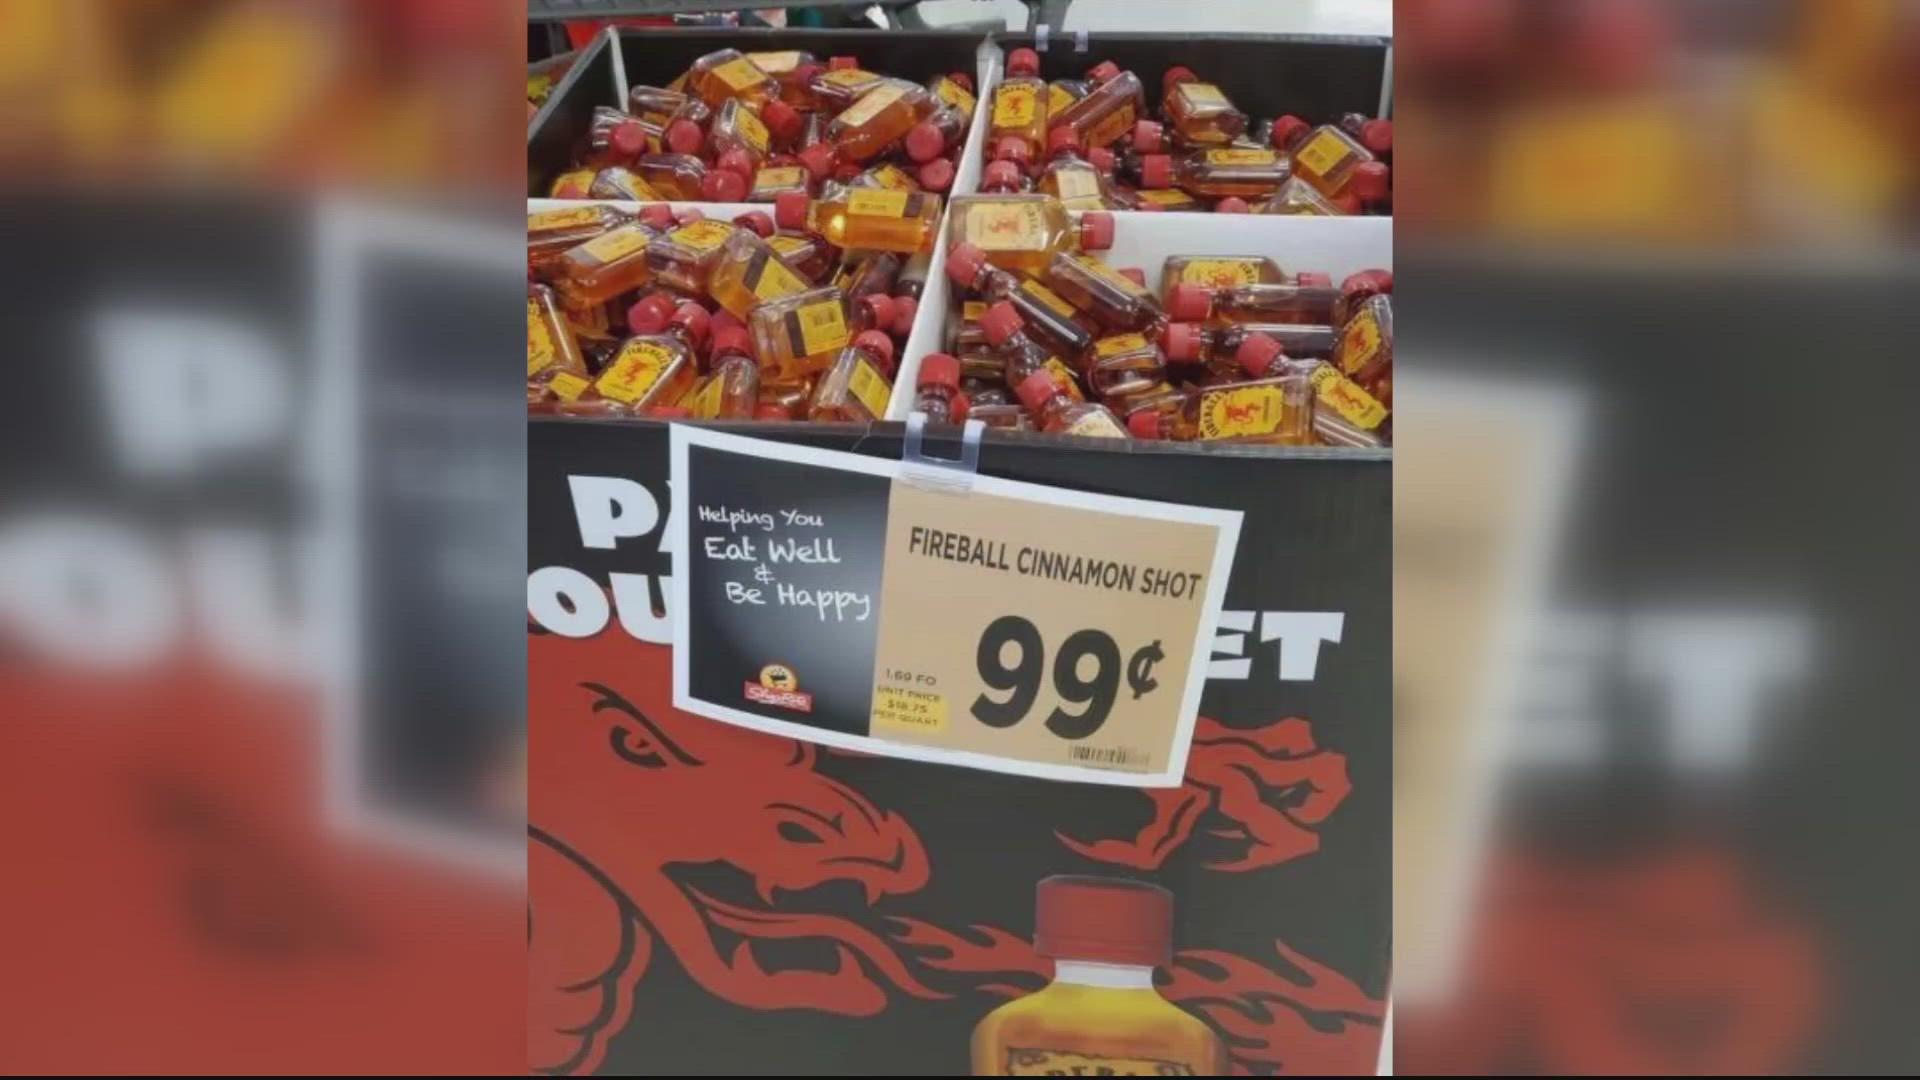 The company makes multiple types of Fireball, but only one contains whiskey.